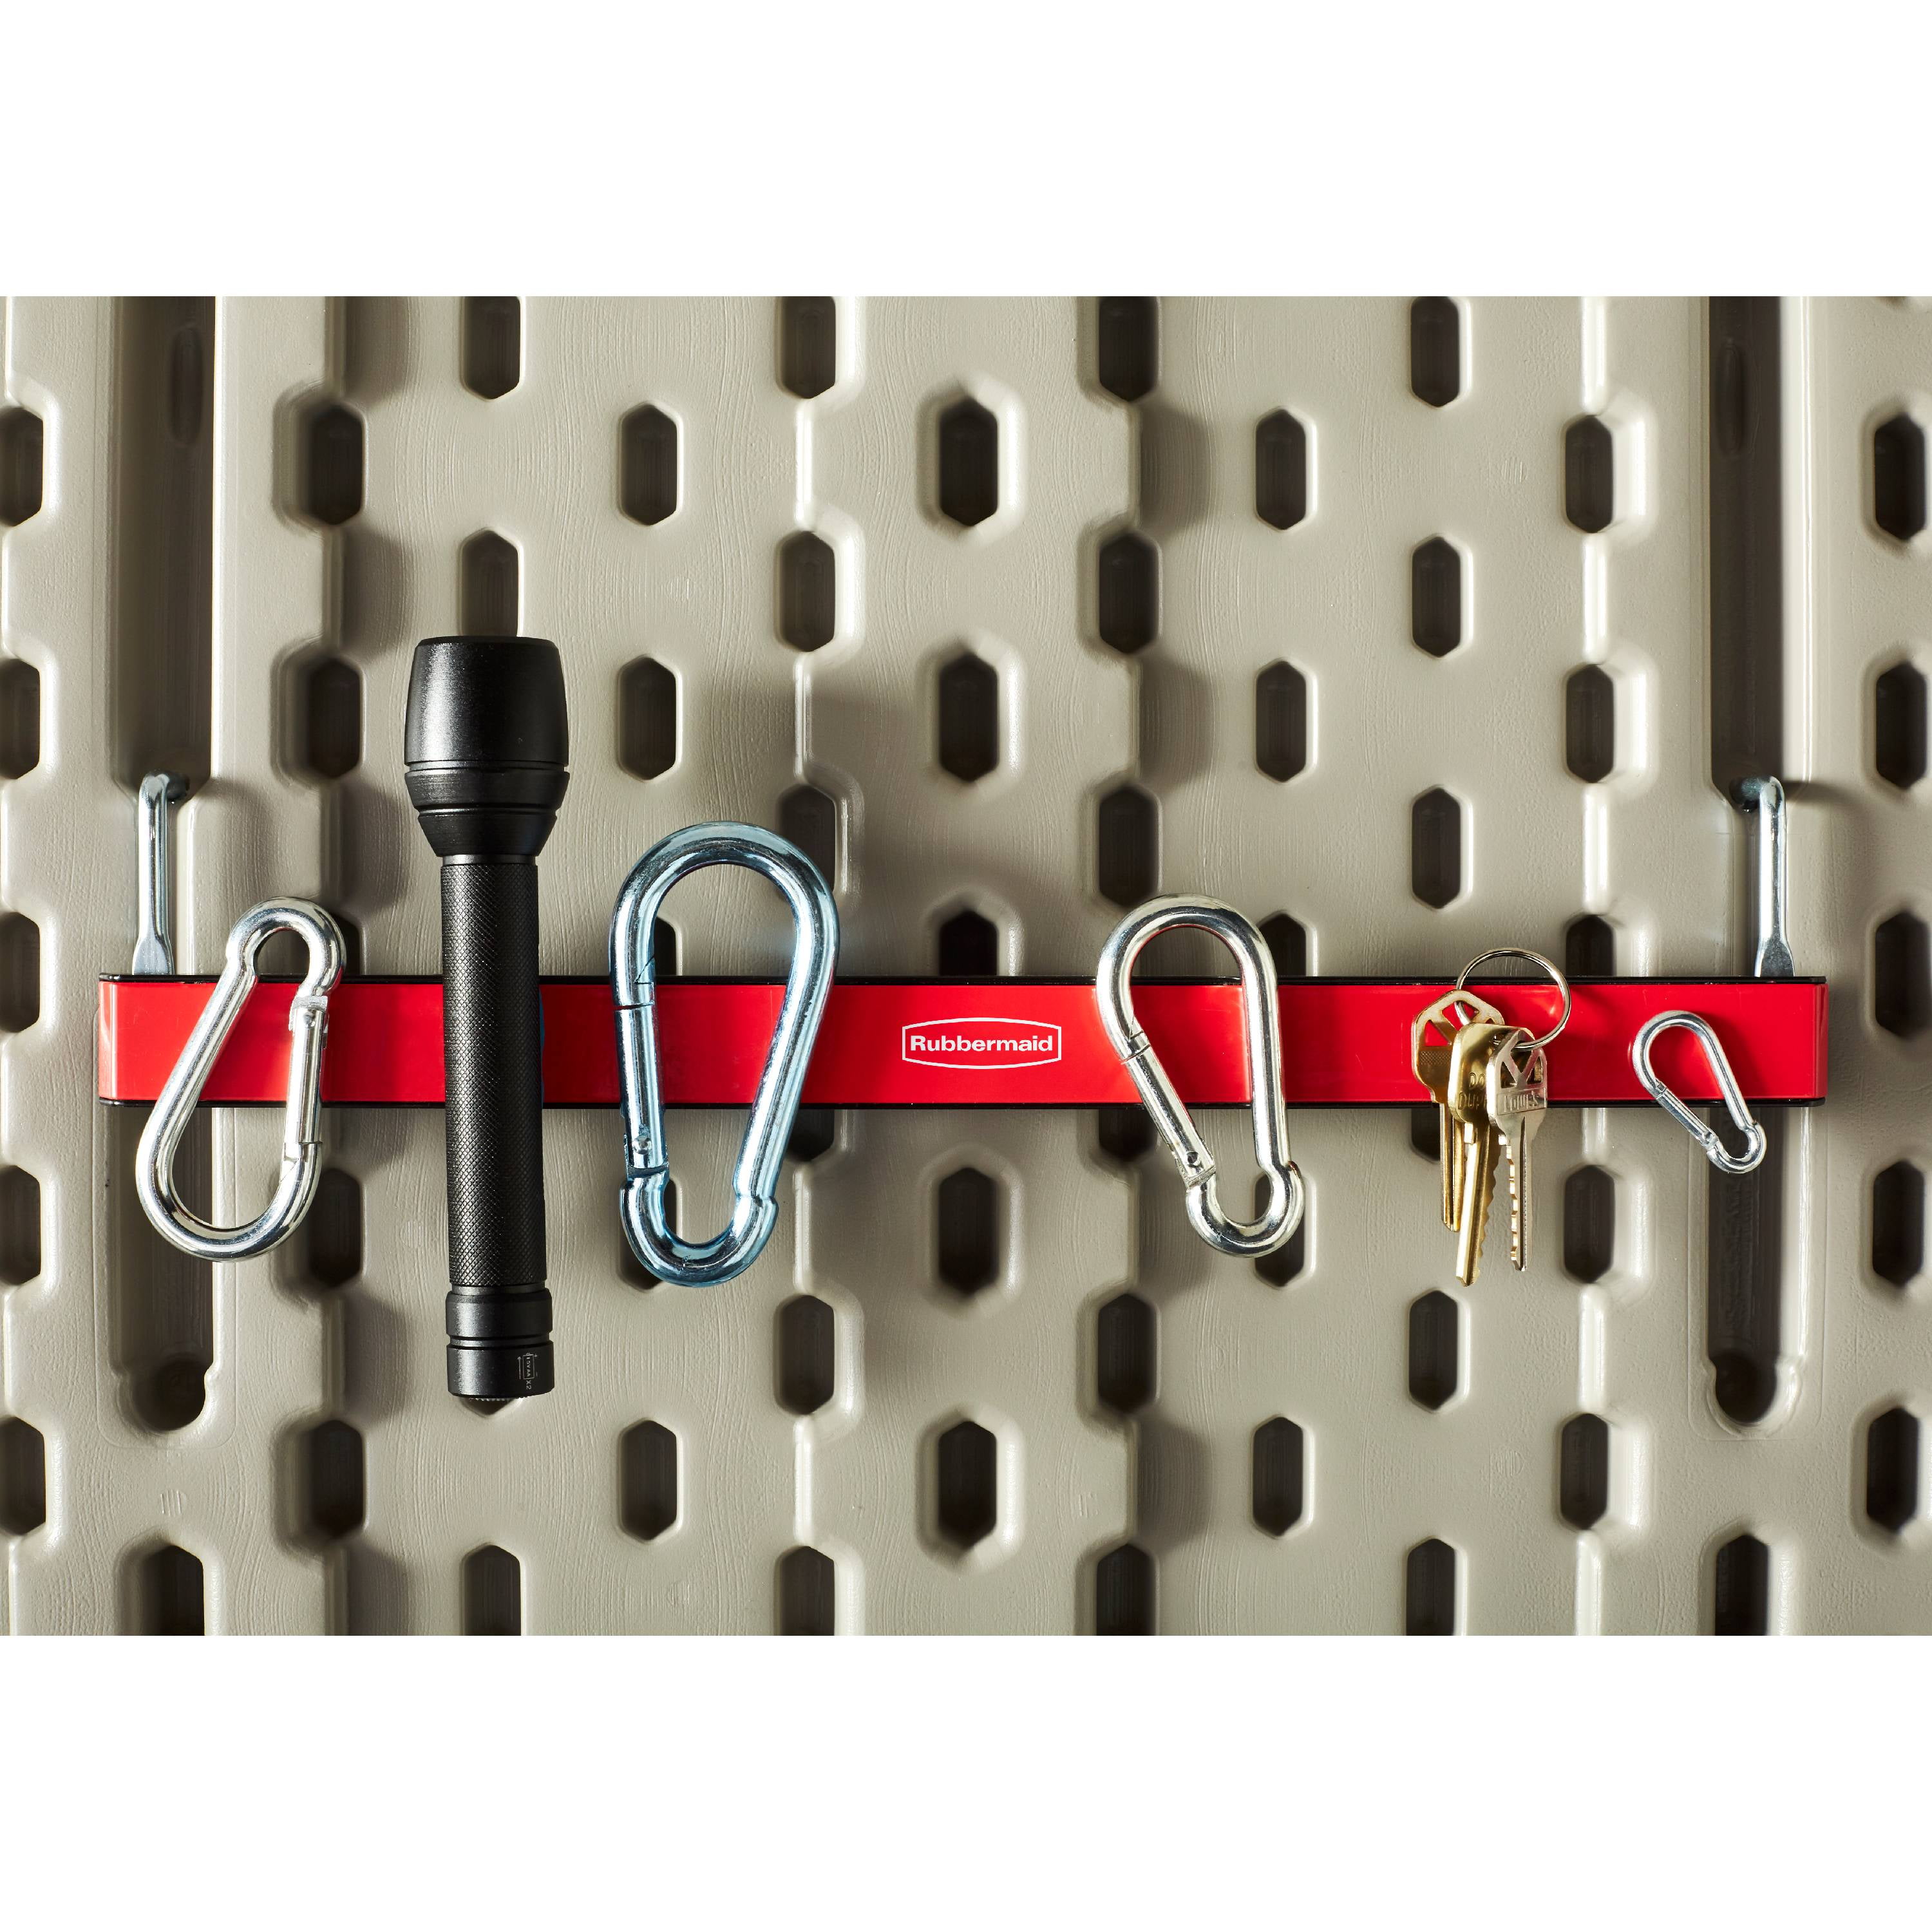  Rubbermaid Shed Accessories Multi-Purpose Hook